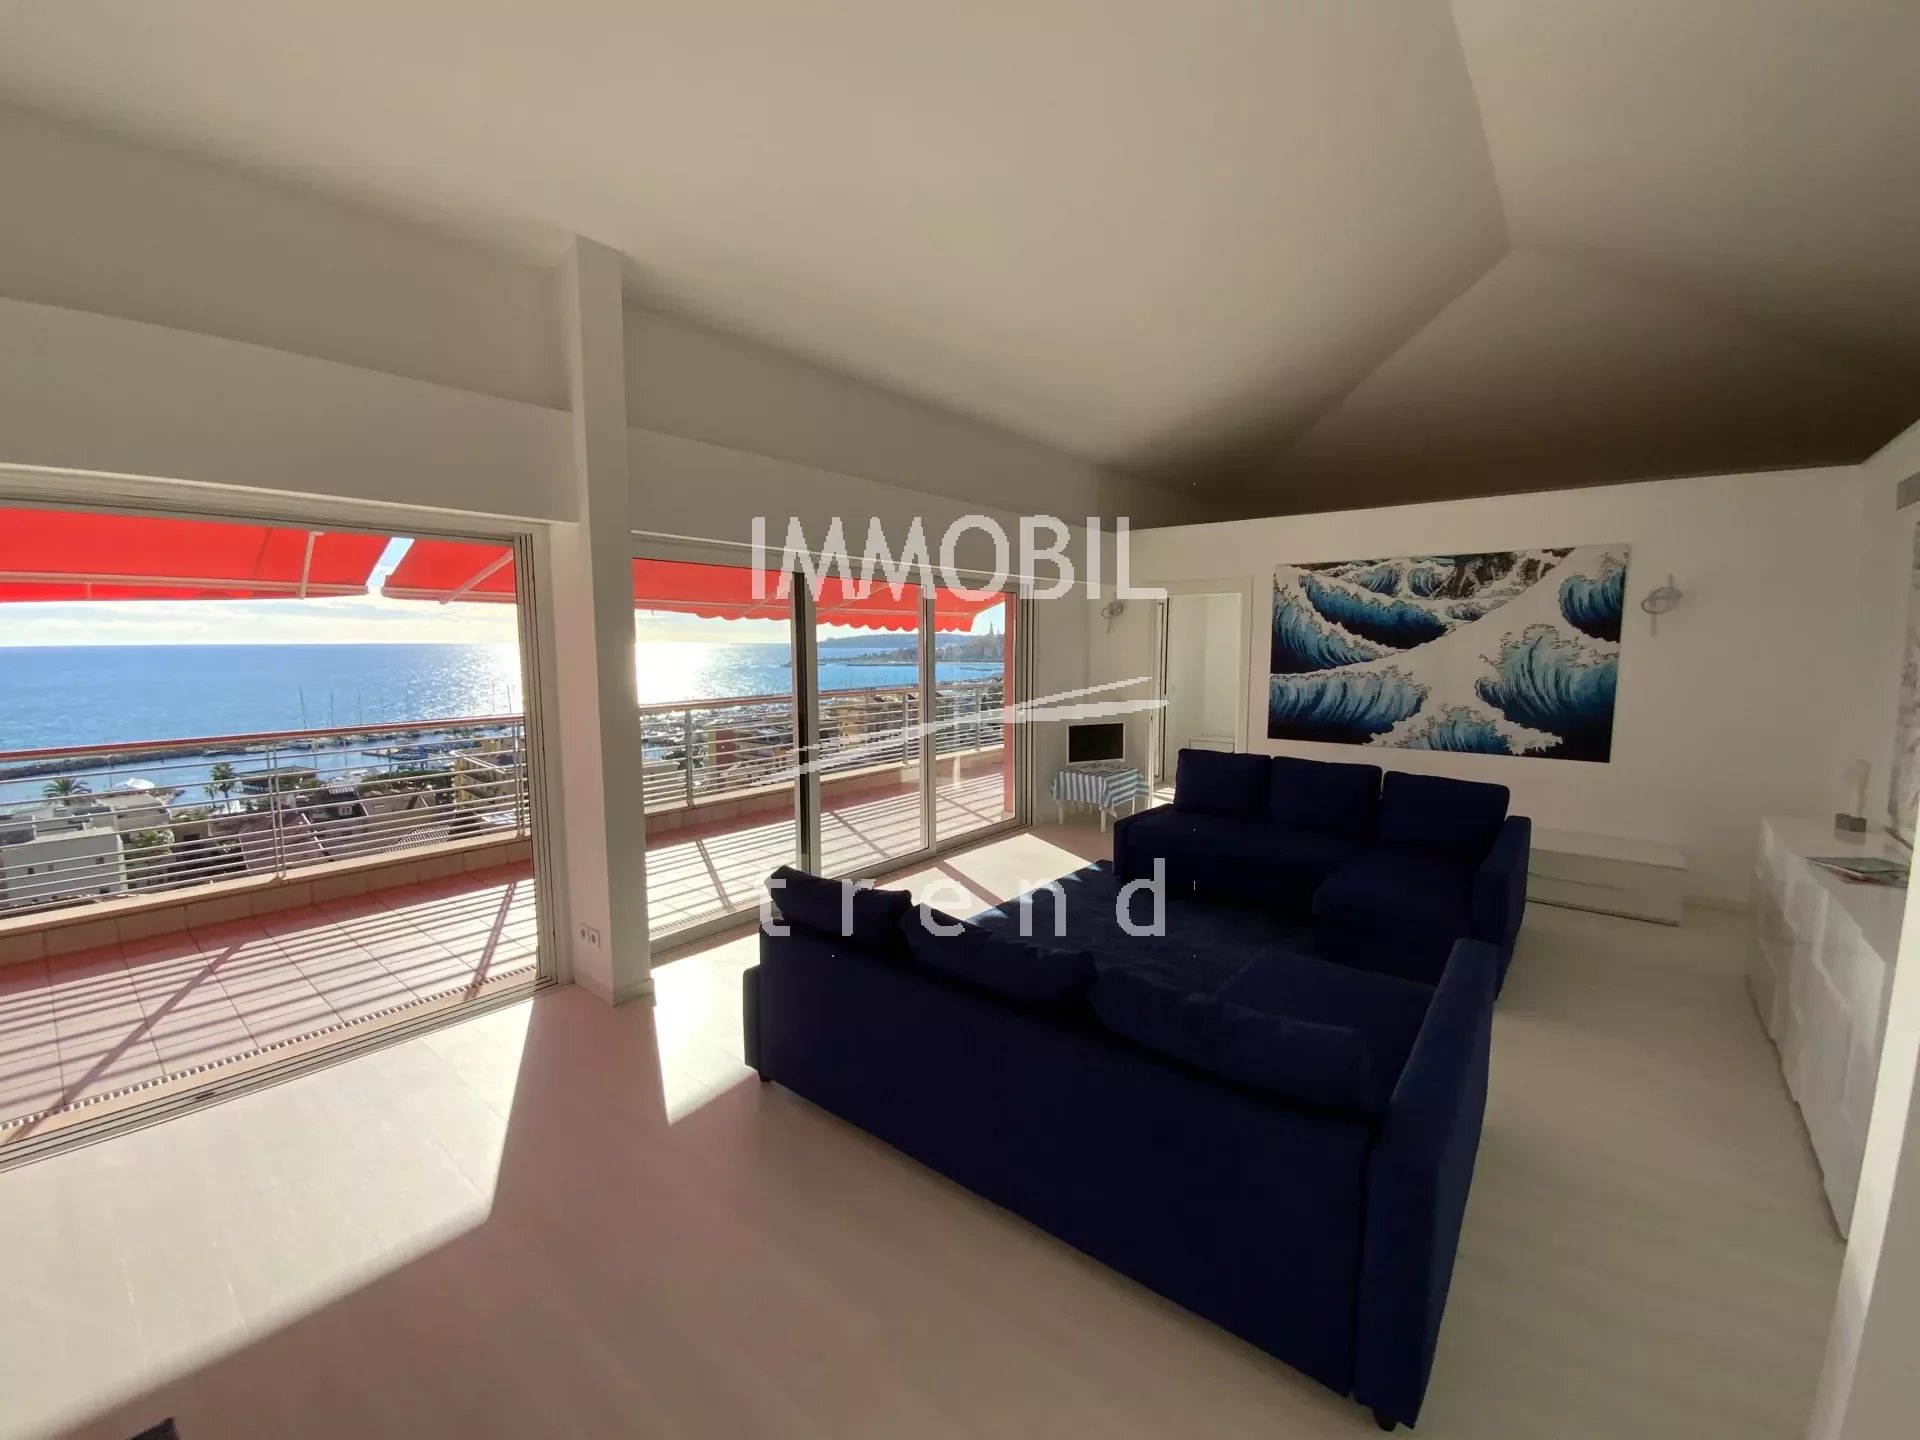 Real estate Menton - For sale, atypical penthouse with three bedrooms and an awesome panoramic sea view